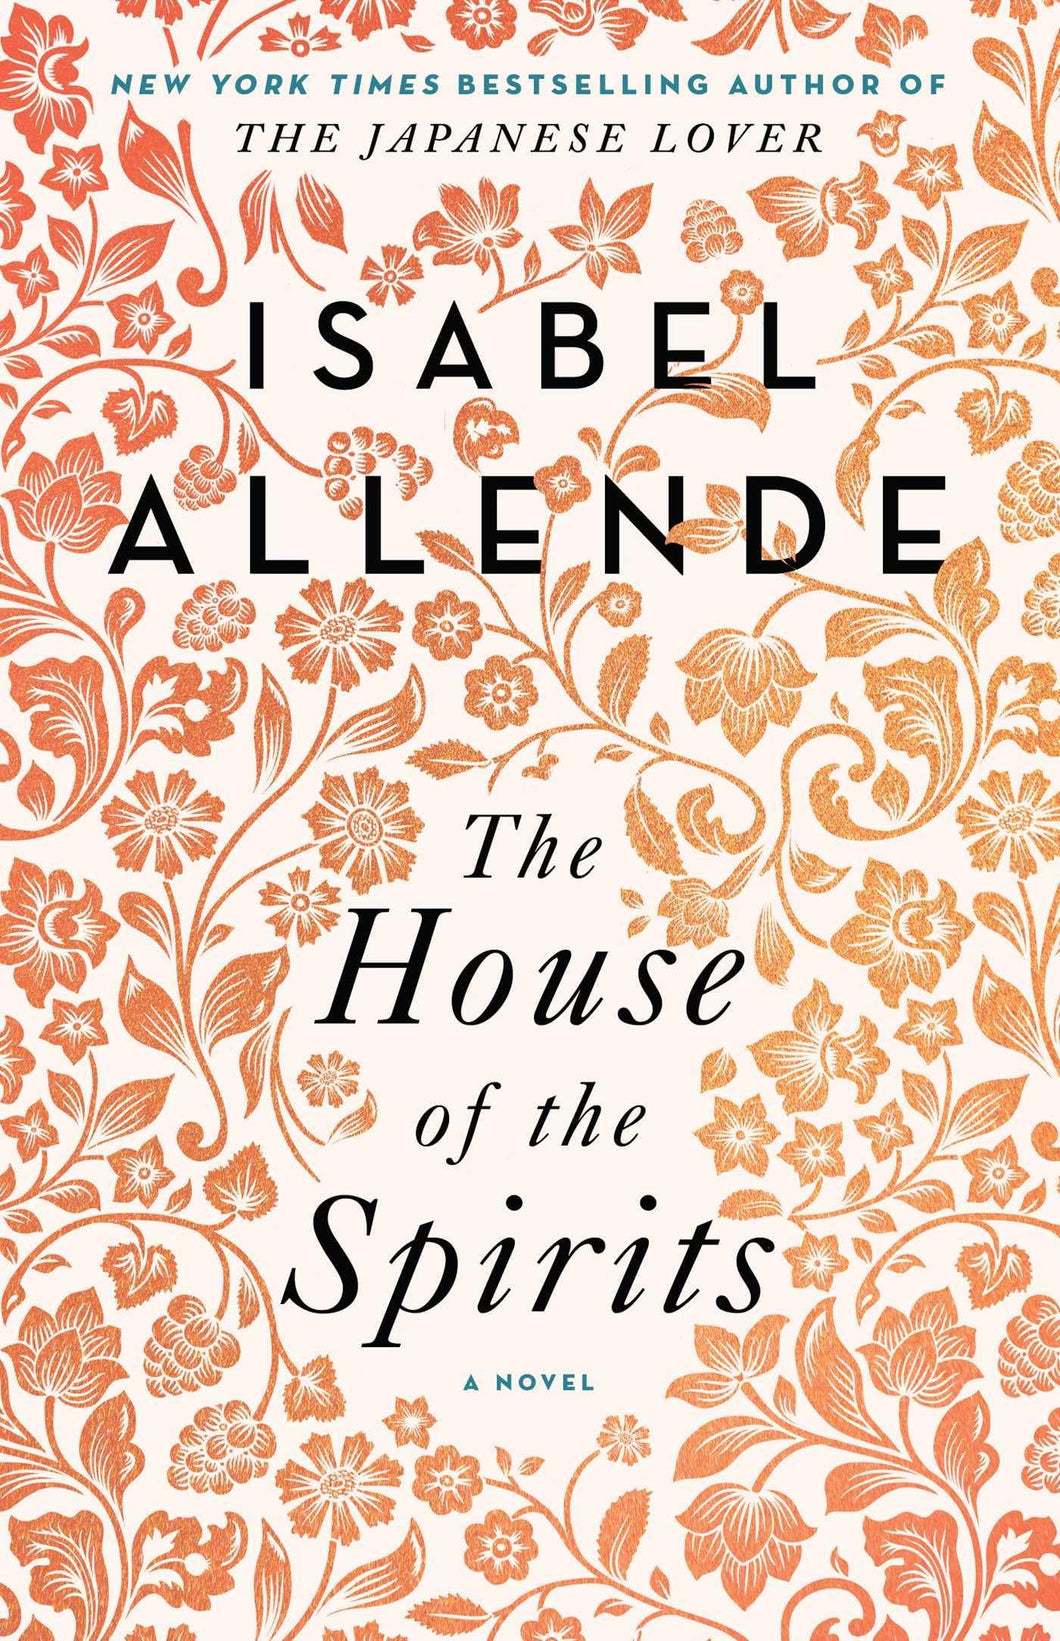 House of the Spirits, The (PB) by Isabel Allende